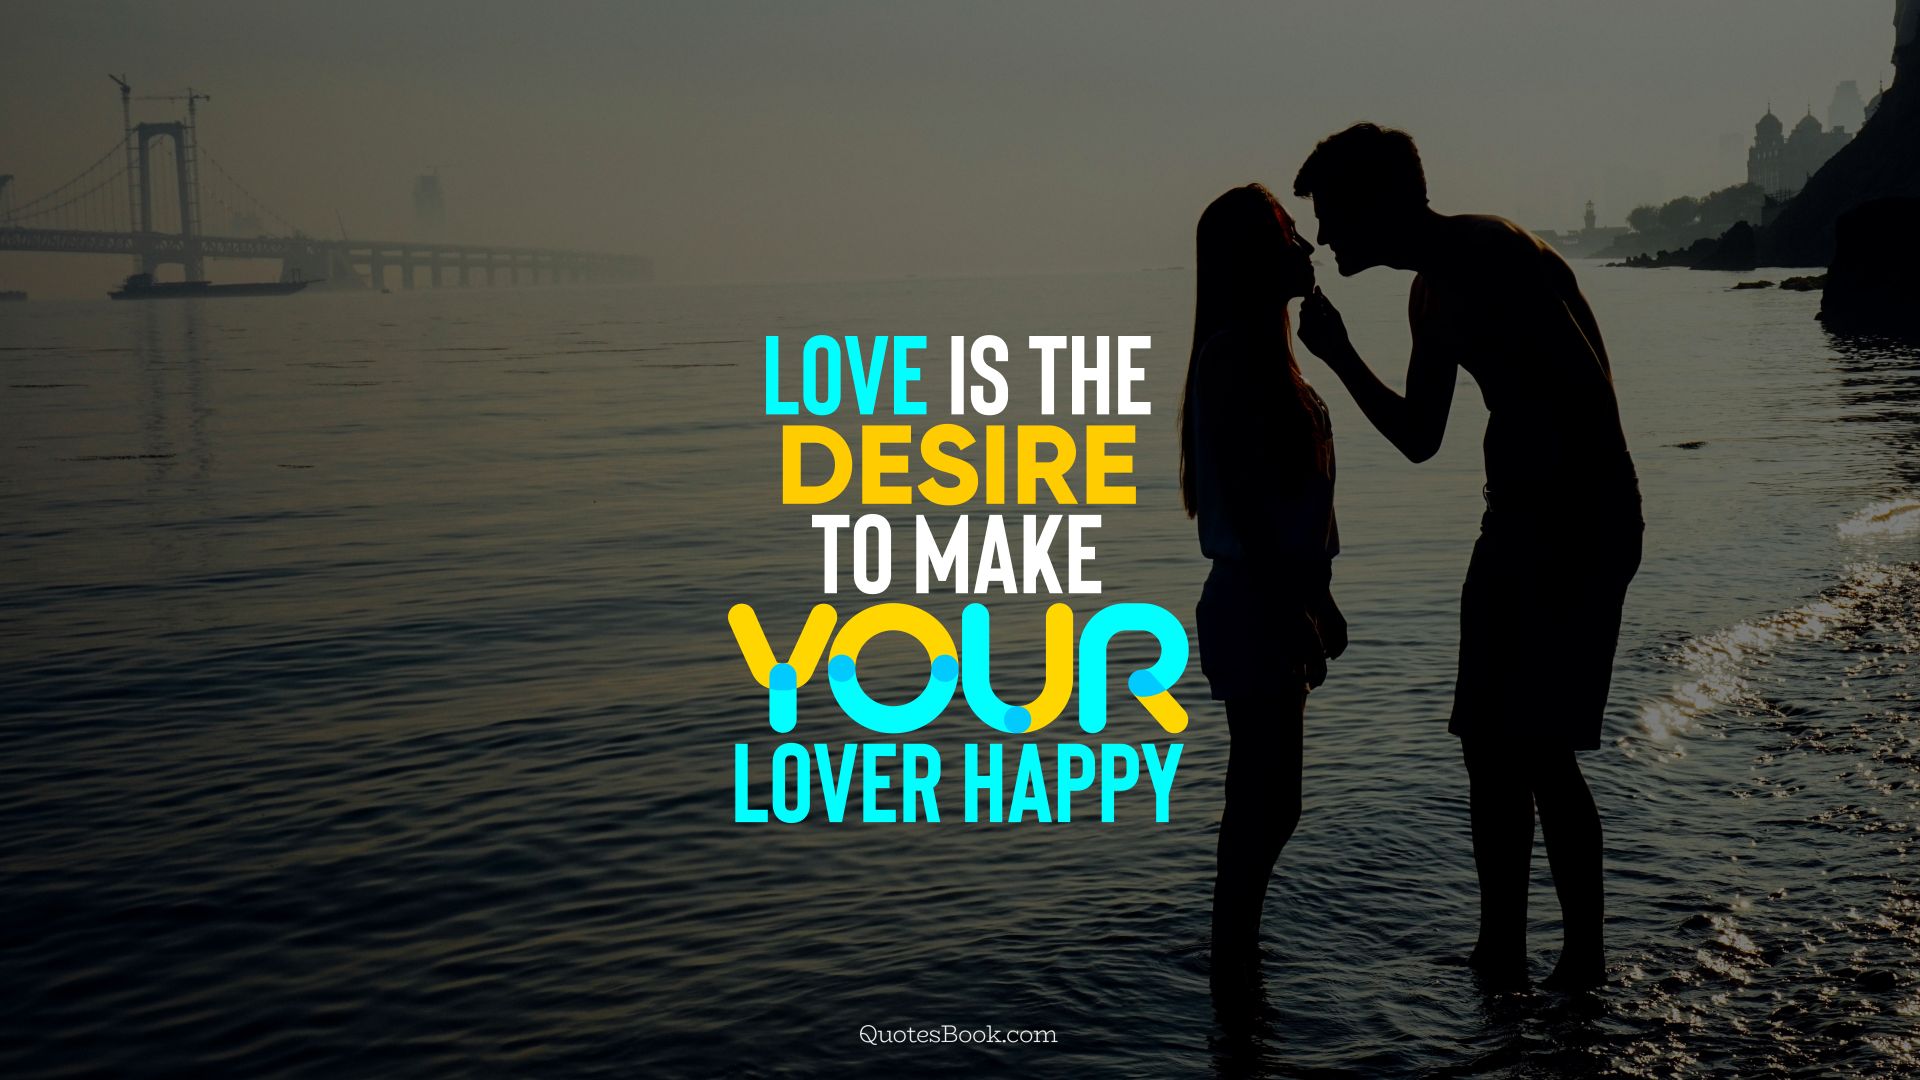 Love is the desire to make your lover happy. 